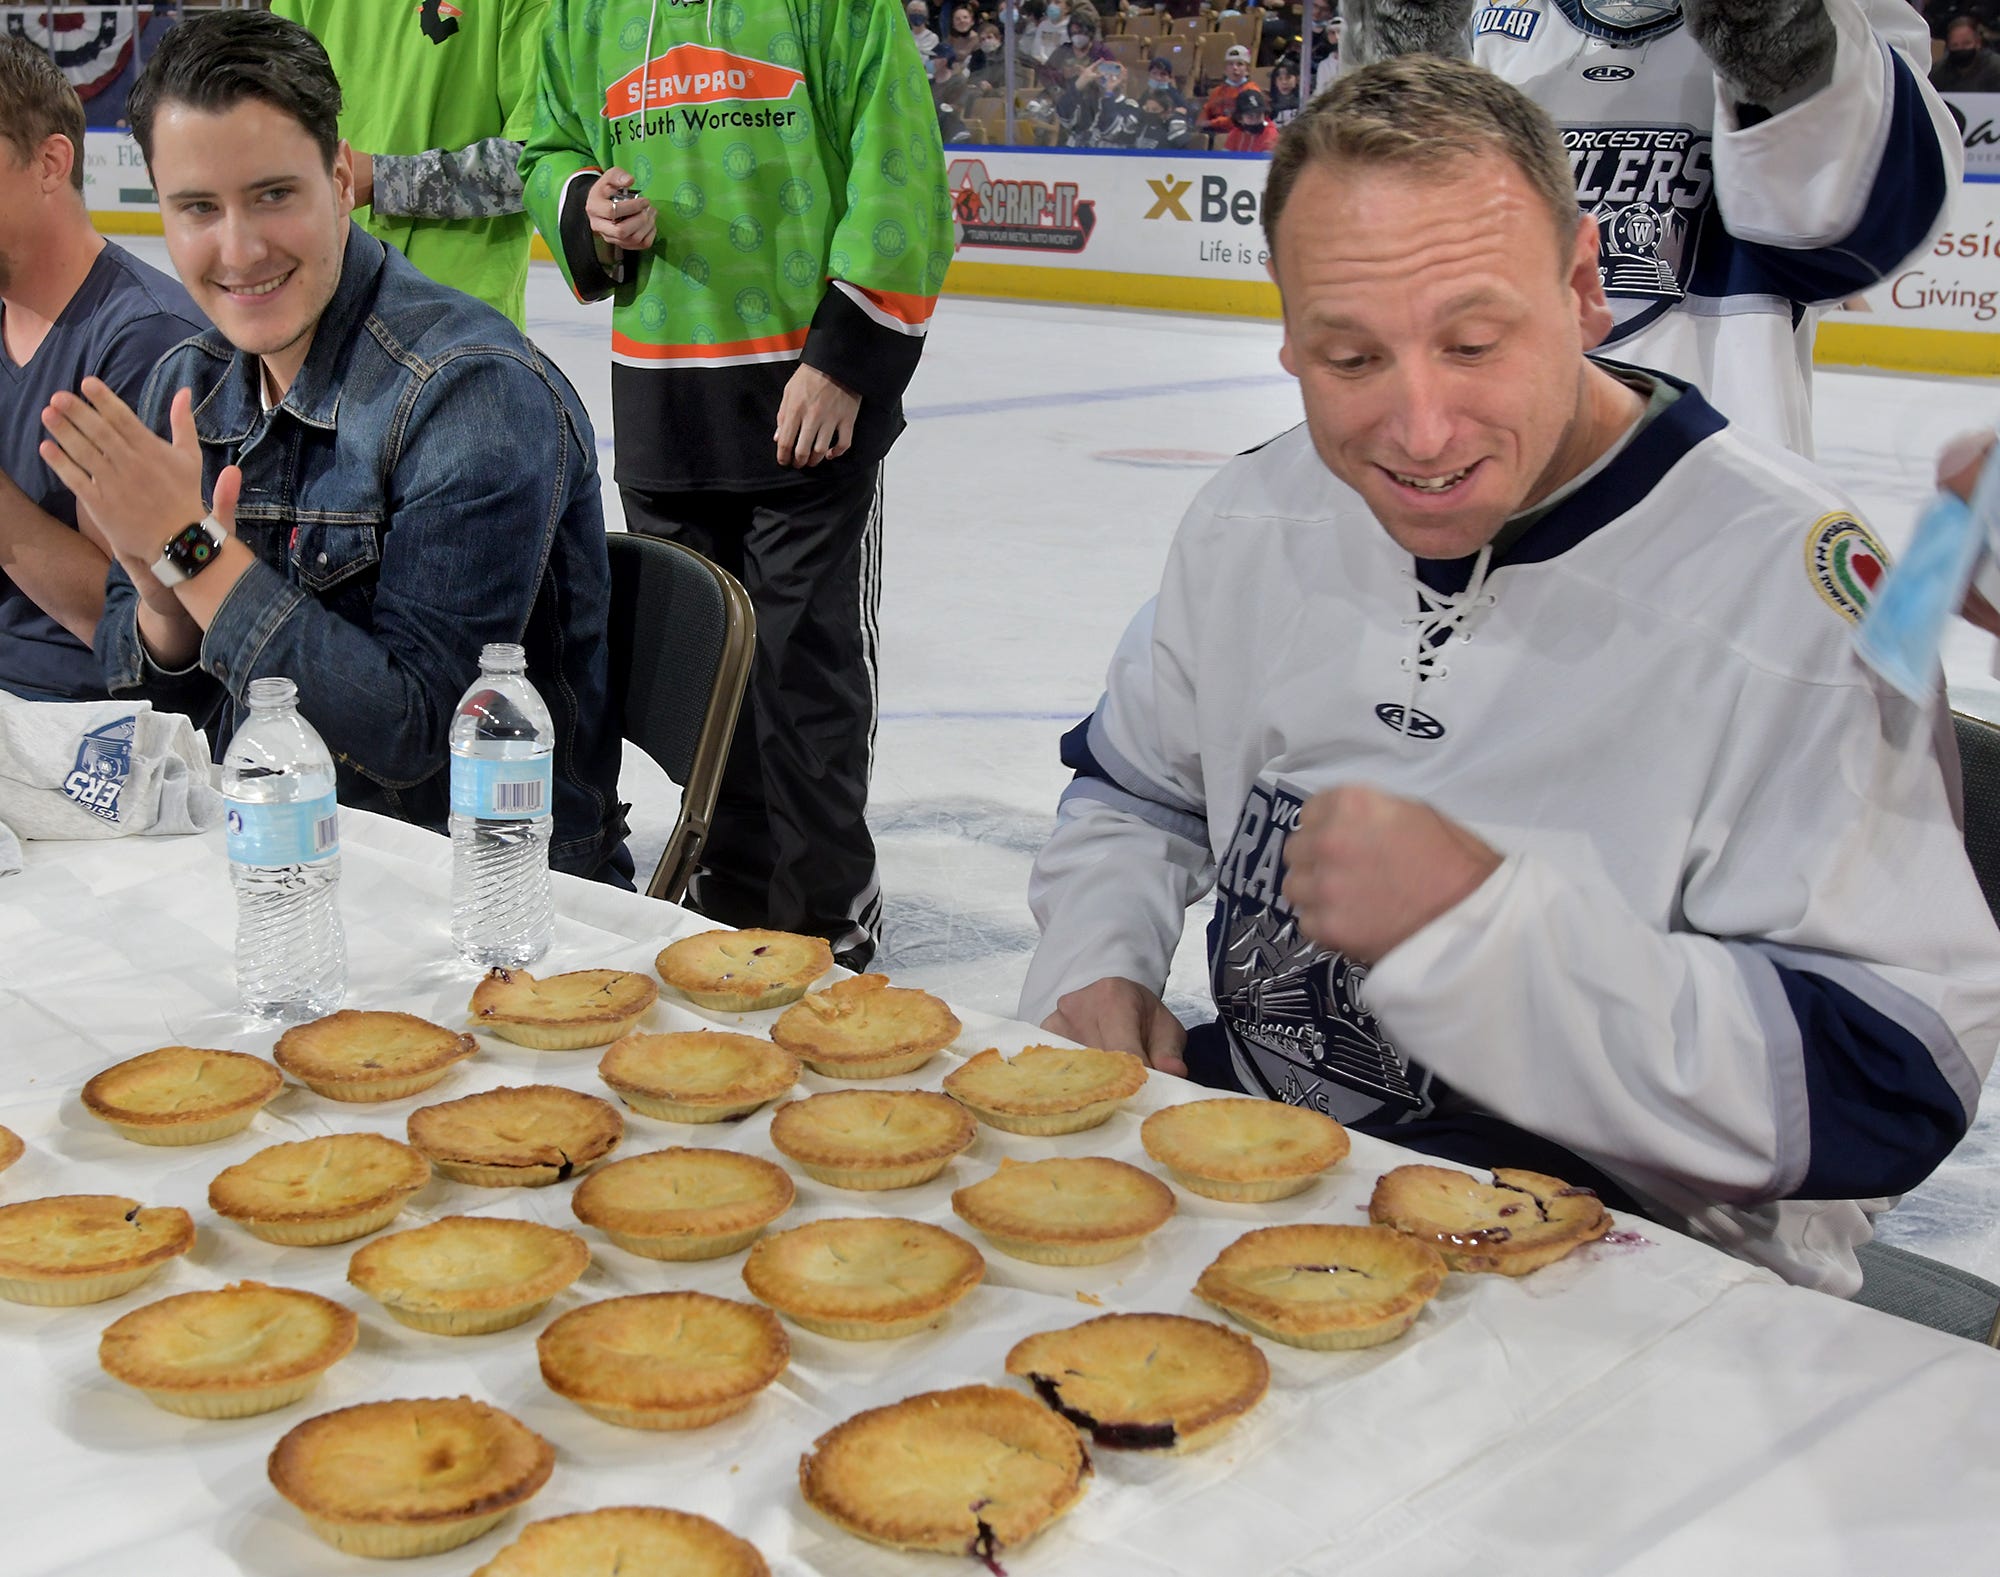 Hungry for hockey: Champion eater Joey Chestnut kicks off Railers' season  by devouring 12 Table Talk pies